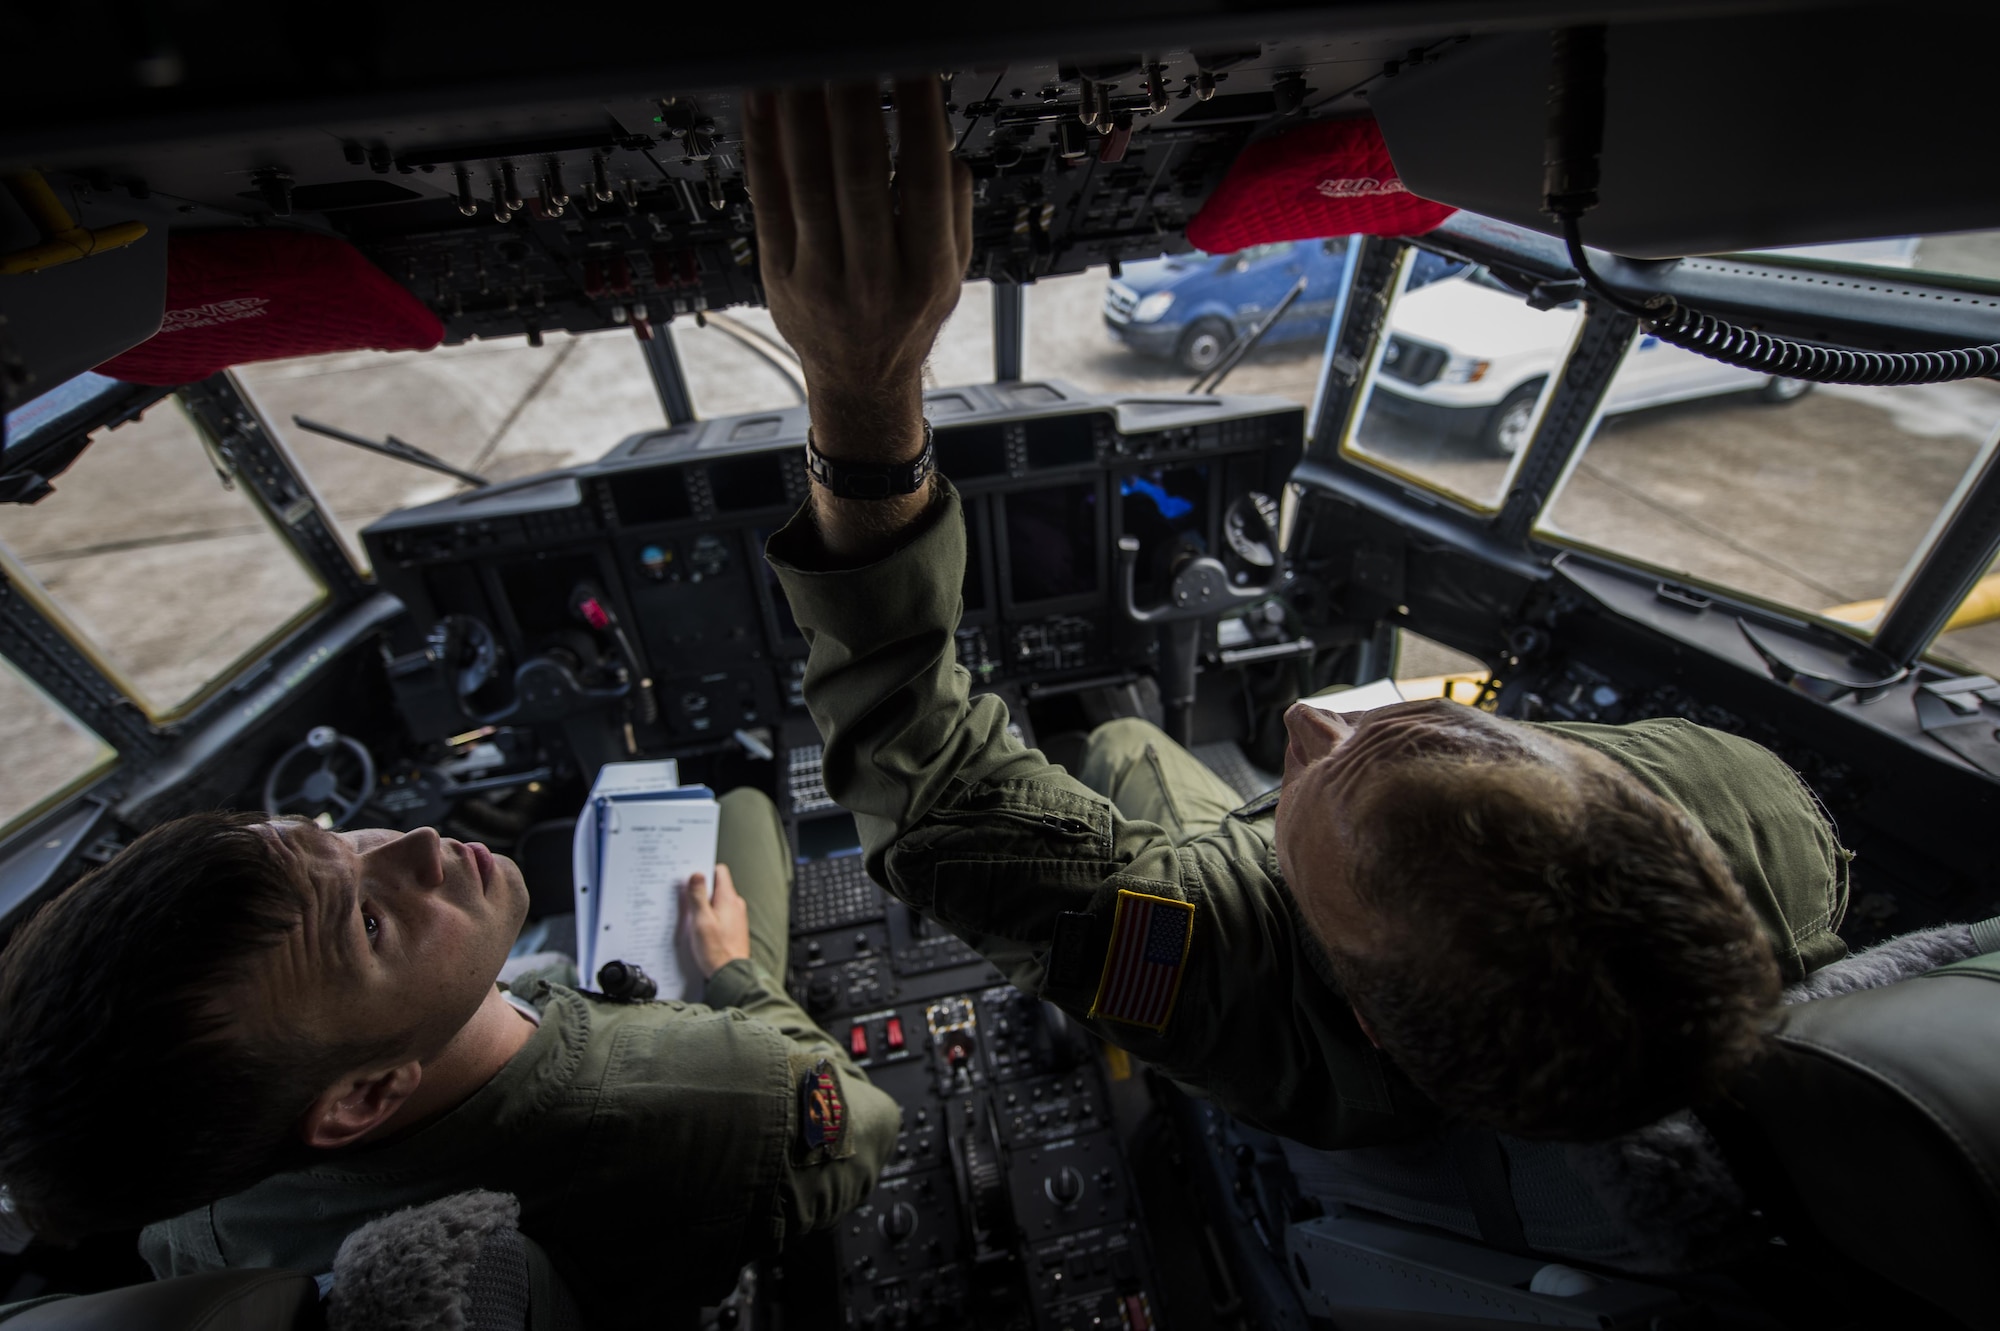 Master Sgt. James Knight right, 18th Flight Test Squadron aerial gunner, instructs Staff Sgt. Rob Turner left, 1st Special Operations Group Detachment 2 aerial gunner, on new changes regarding pre-flight inspections in an AC-130J Ghostrider on Eglin Air Force Base, Fla., July 29, 2015. The aircrews of the 1st SOG Det. 2 were hand selected from the AC-130 community for their operational expertise and will begin initial operational testing and evaluation of the AC-130J later this year. (U.S. Air Force photo/Senior Airman Christopher Callaway)